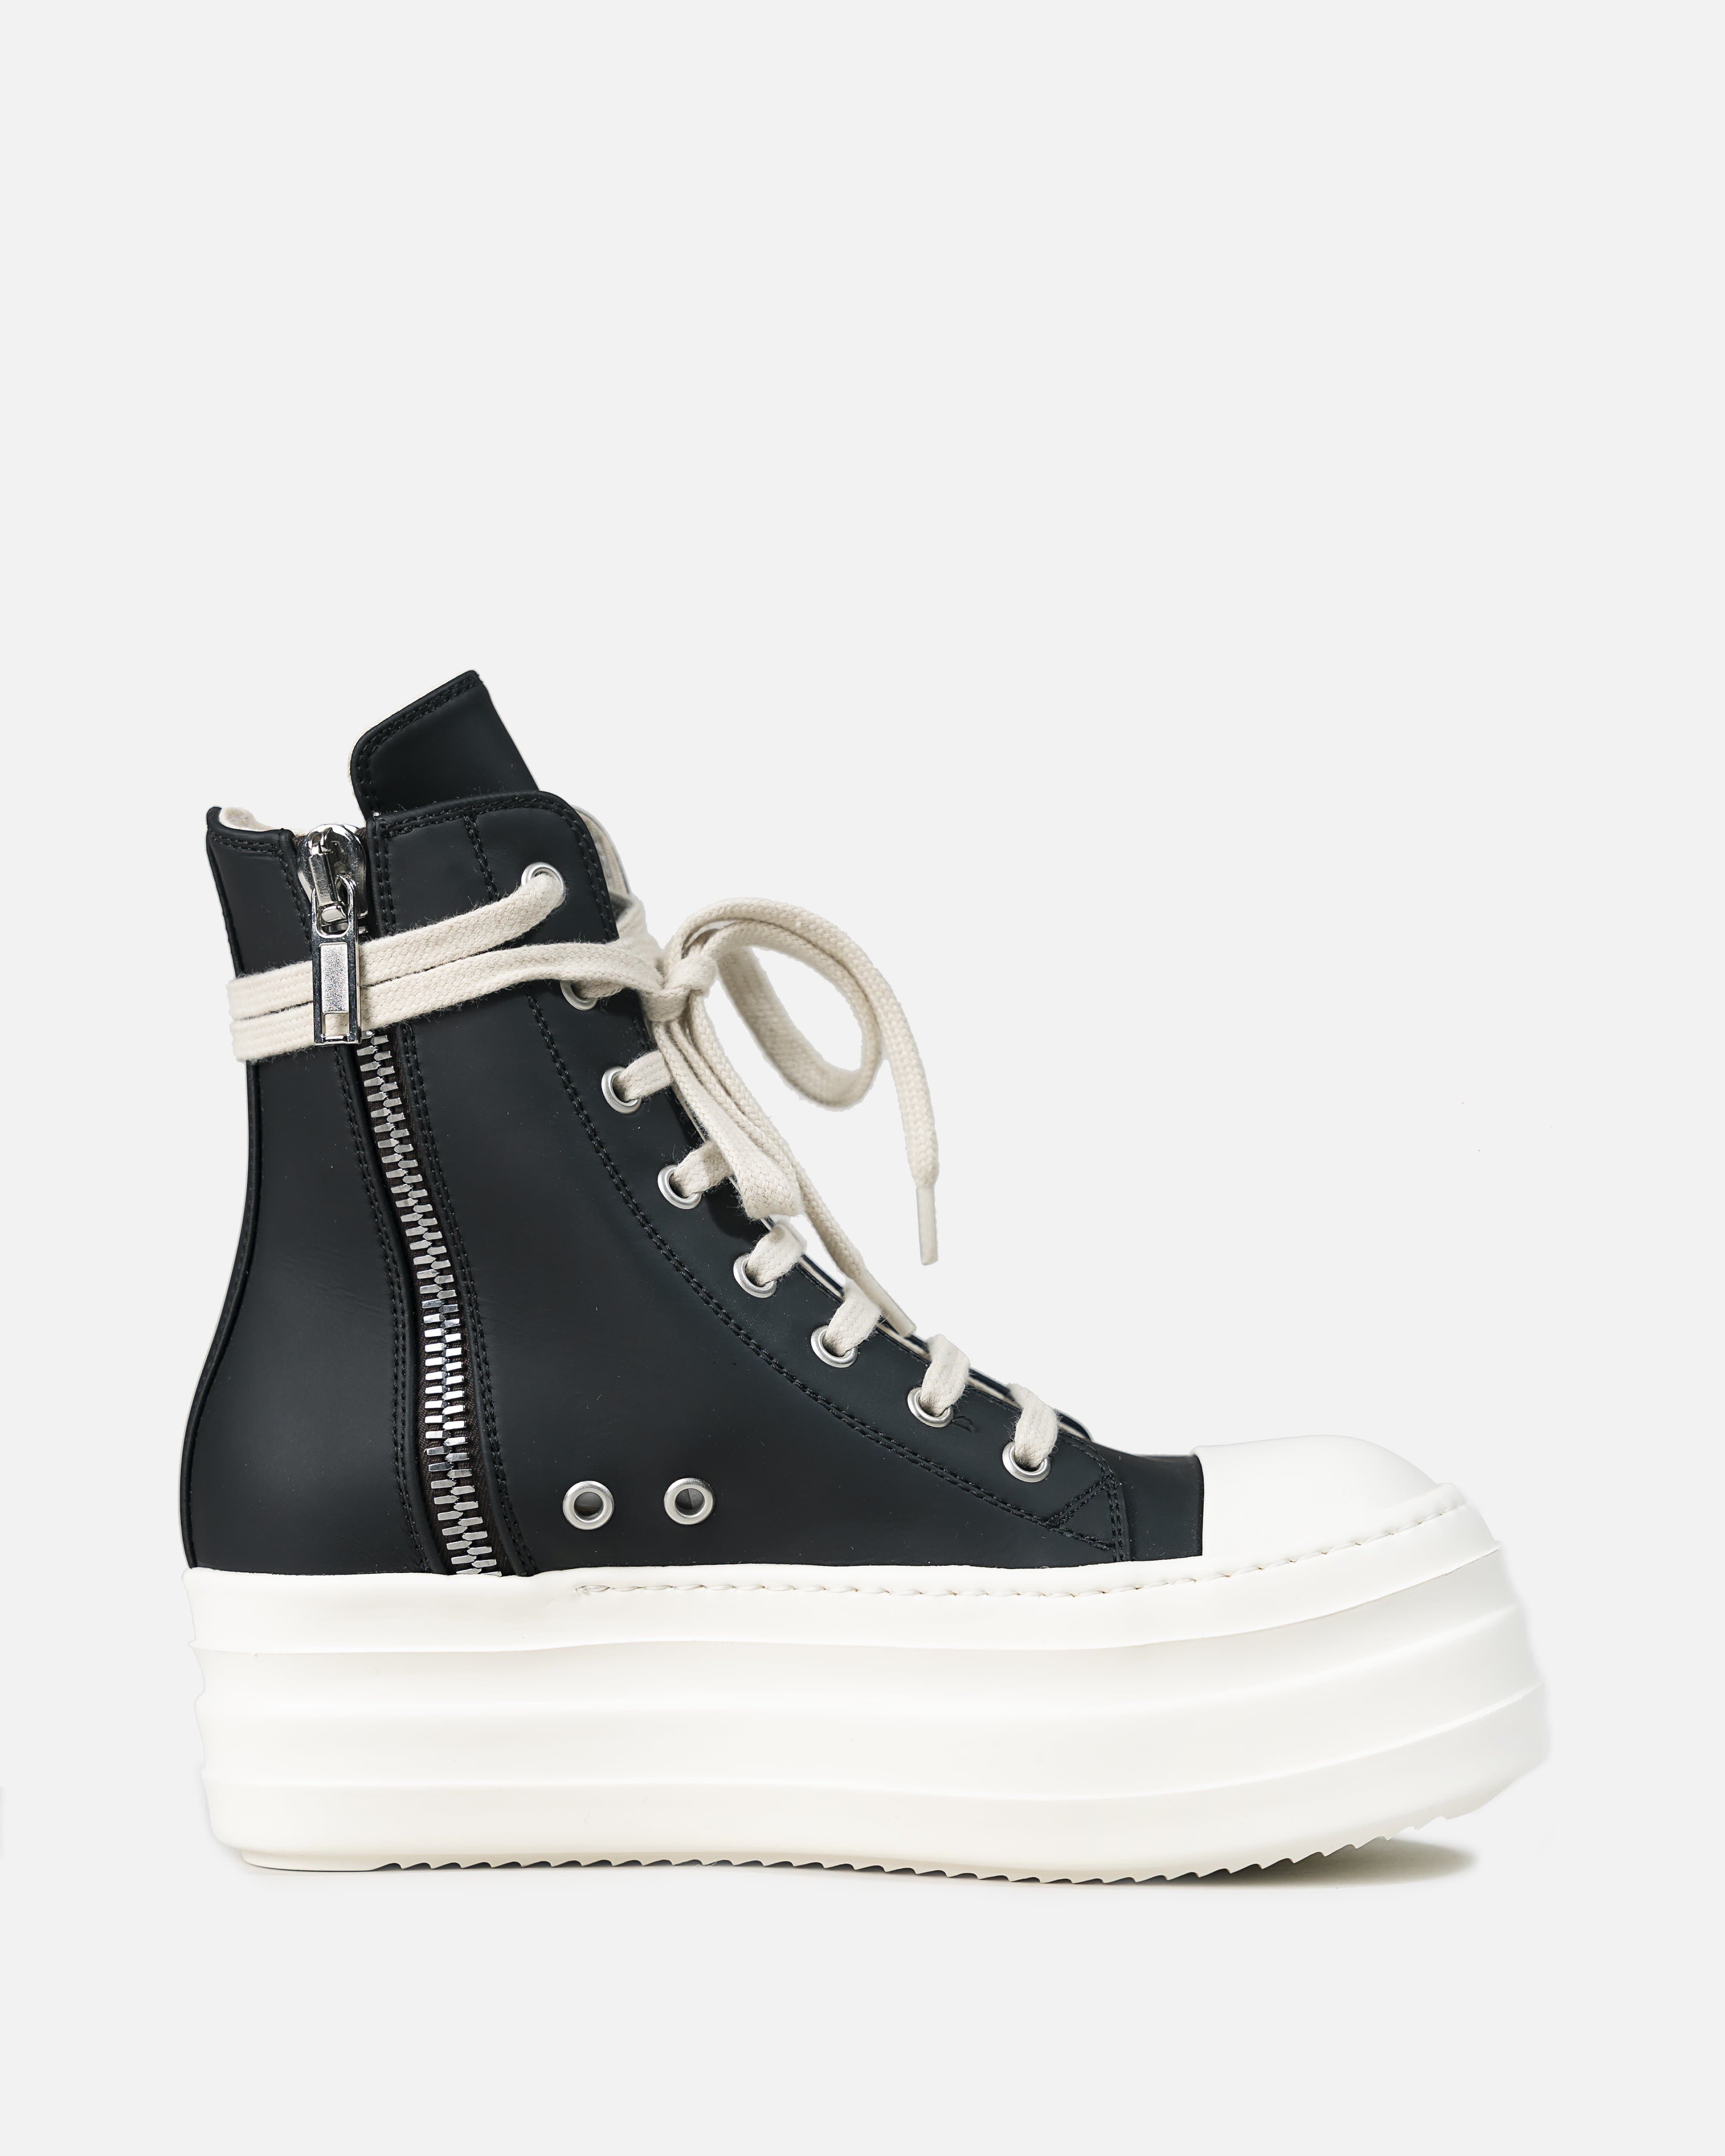 Double Bumper Sneaker in Black and White